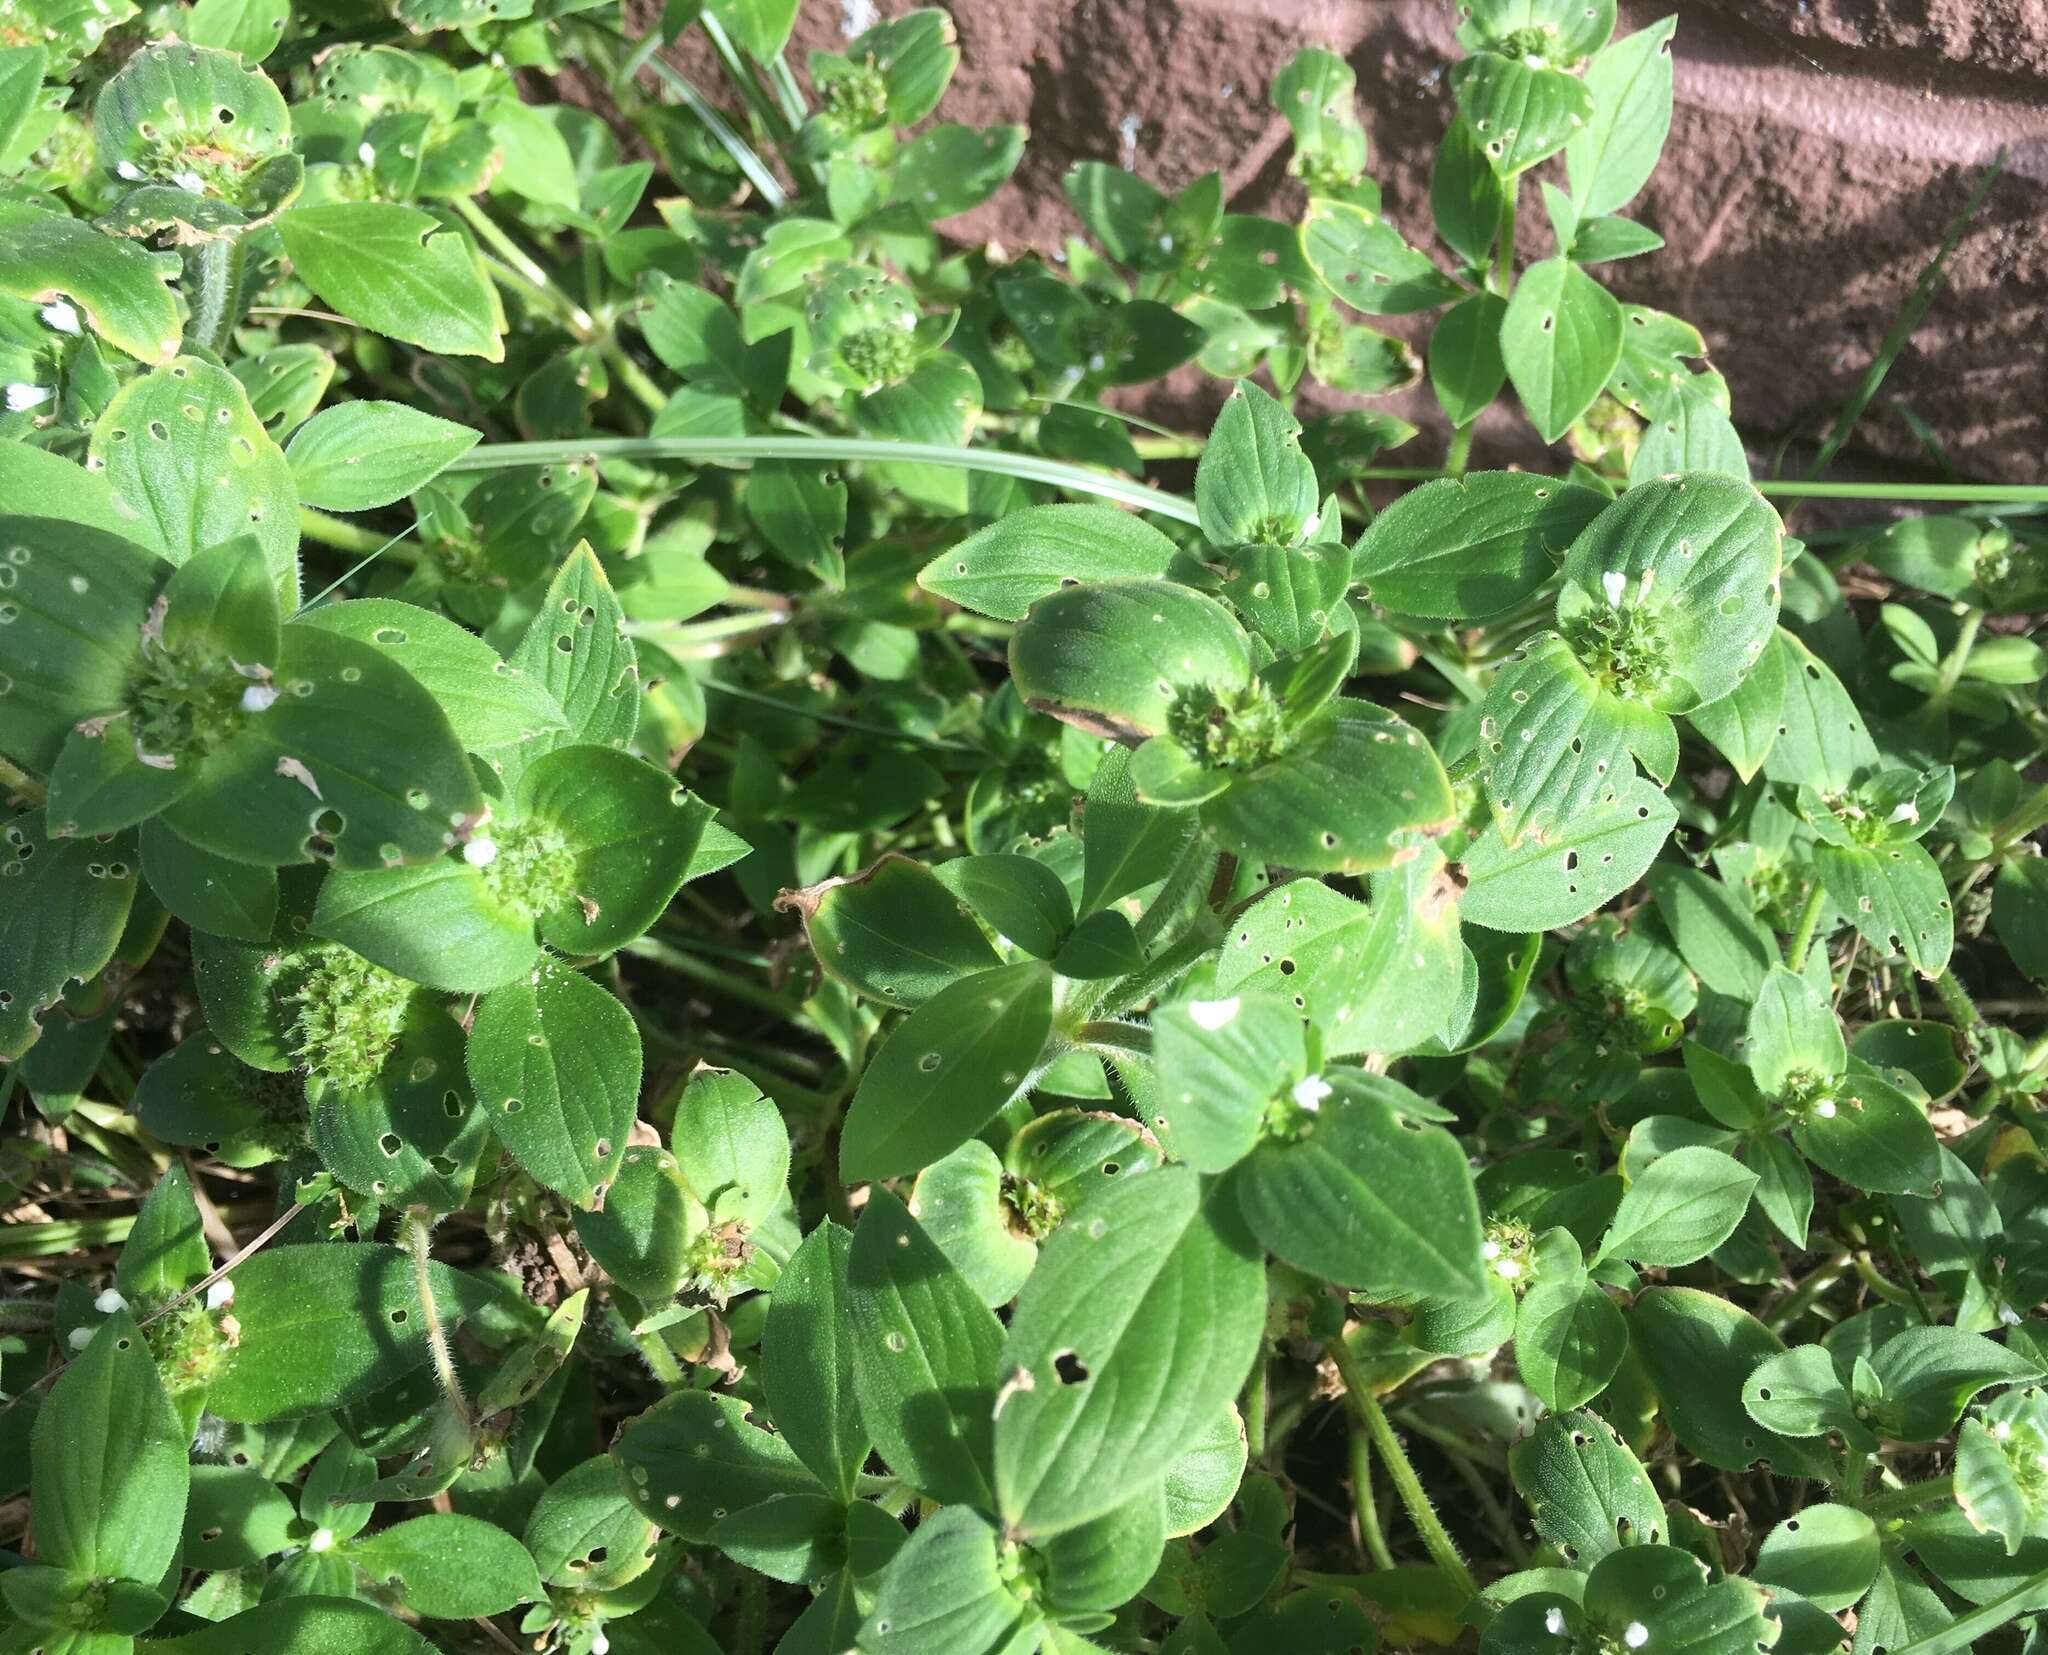 Image of rough Mexican clover